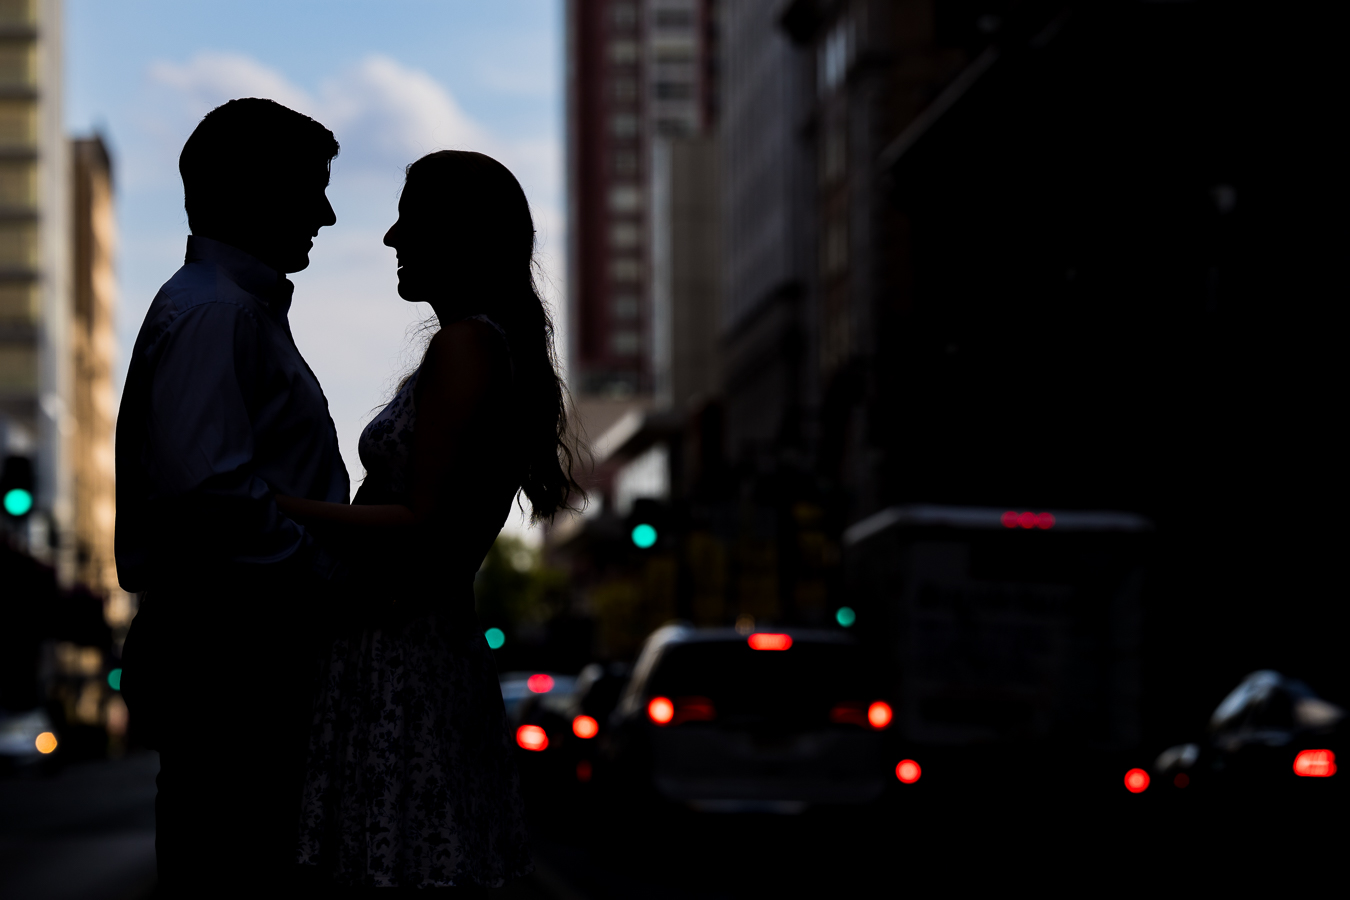 creative, unique silhouetted image of the couple as they smile at each other with he vibrant blue sky behind them and taillights of the cars in the background popping 